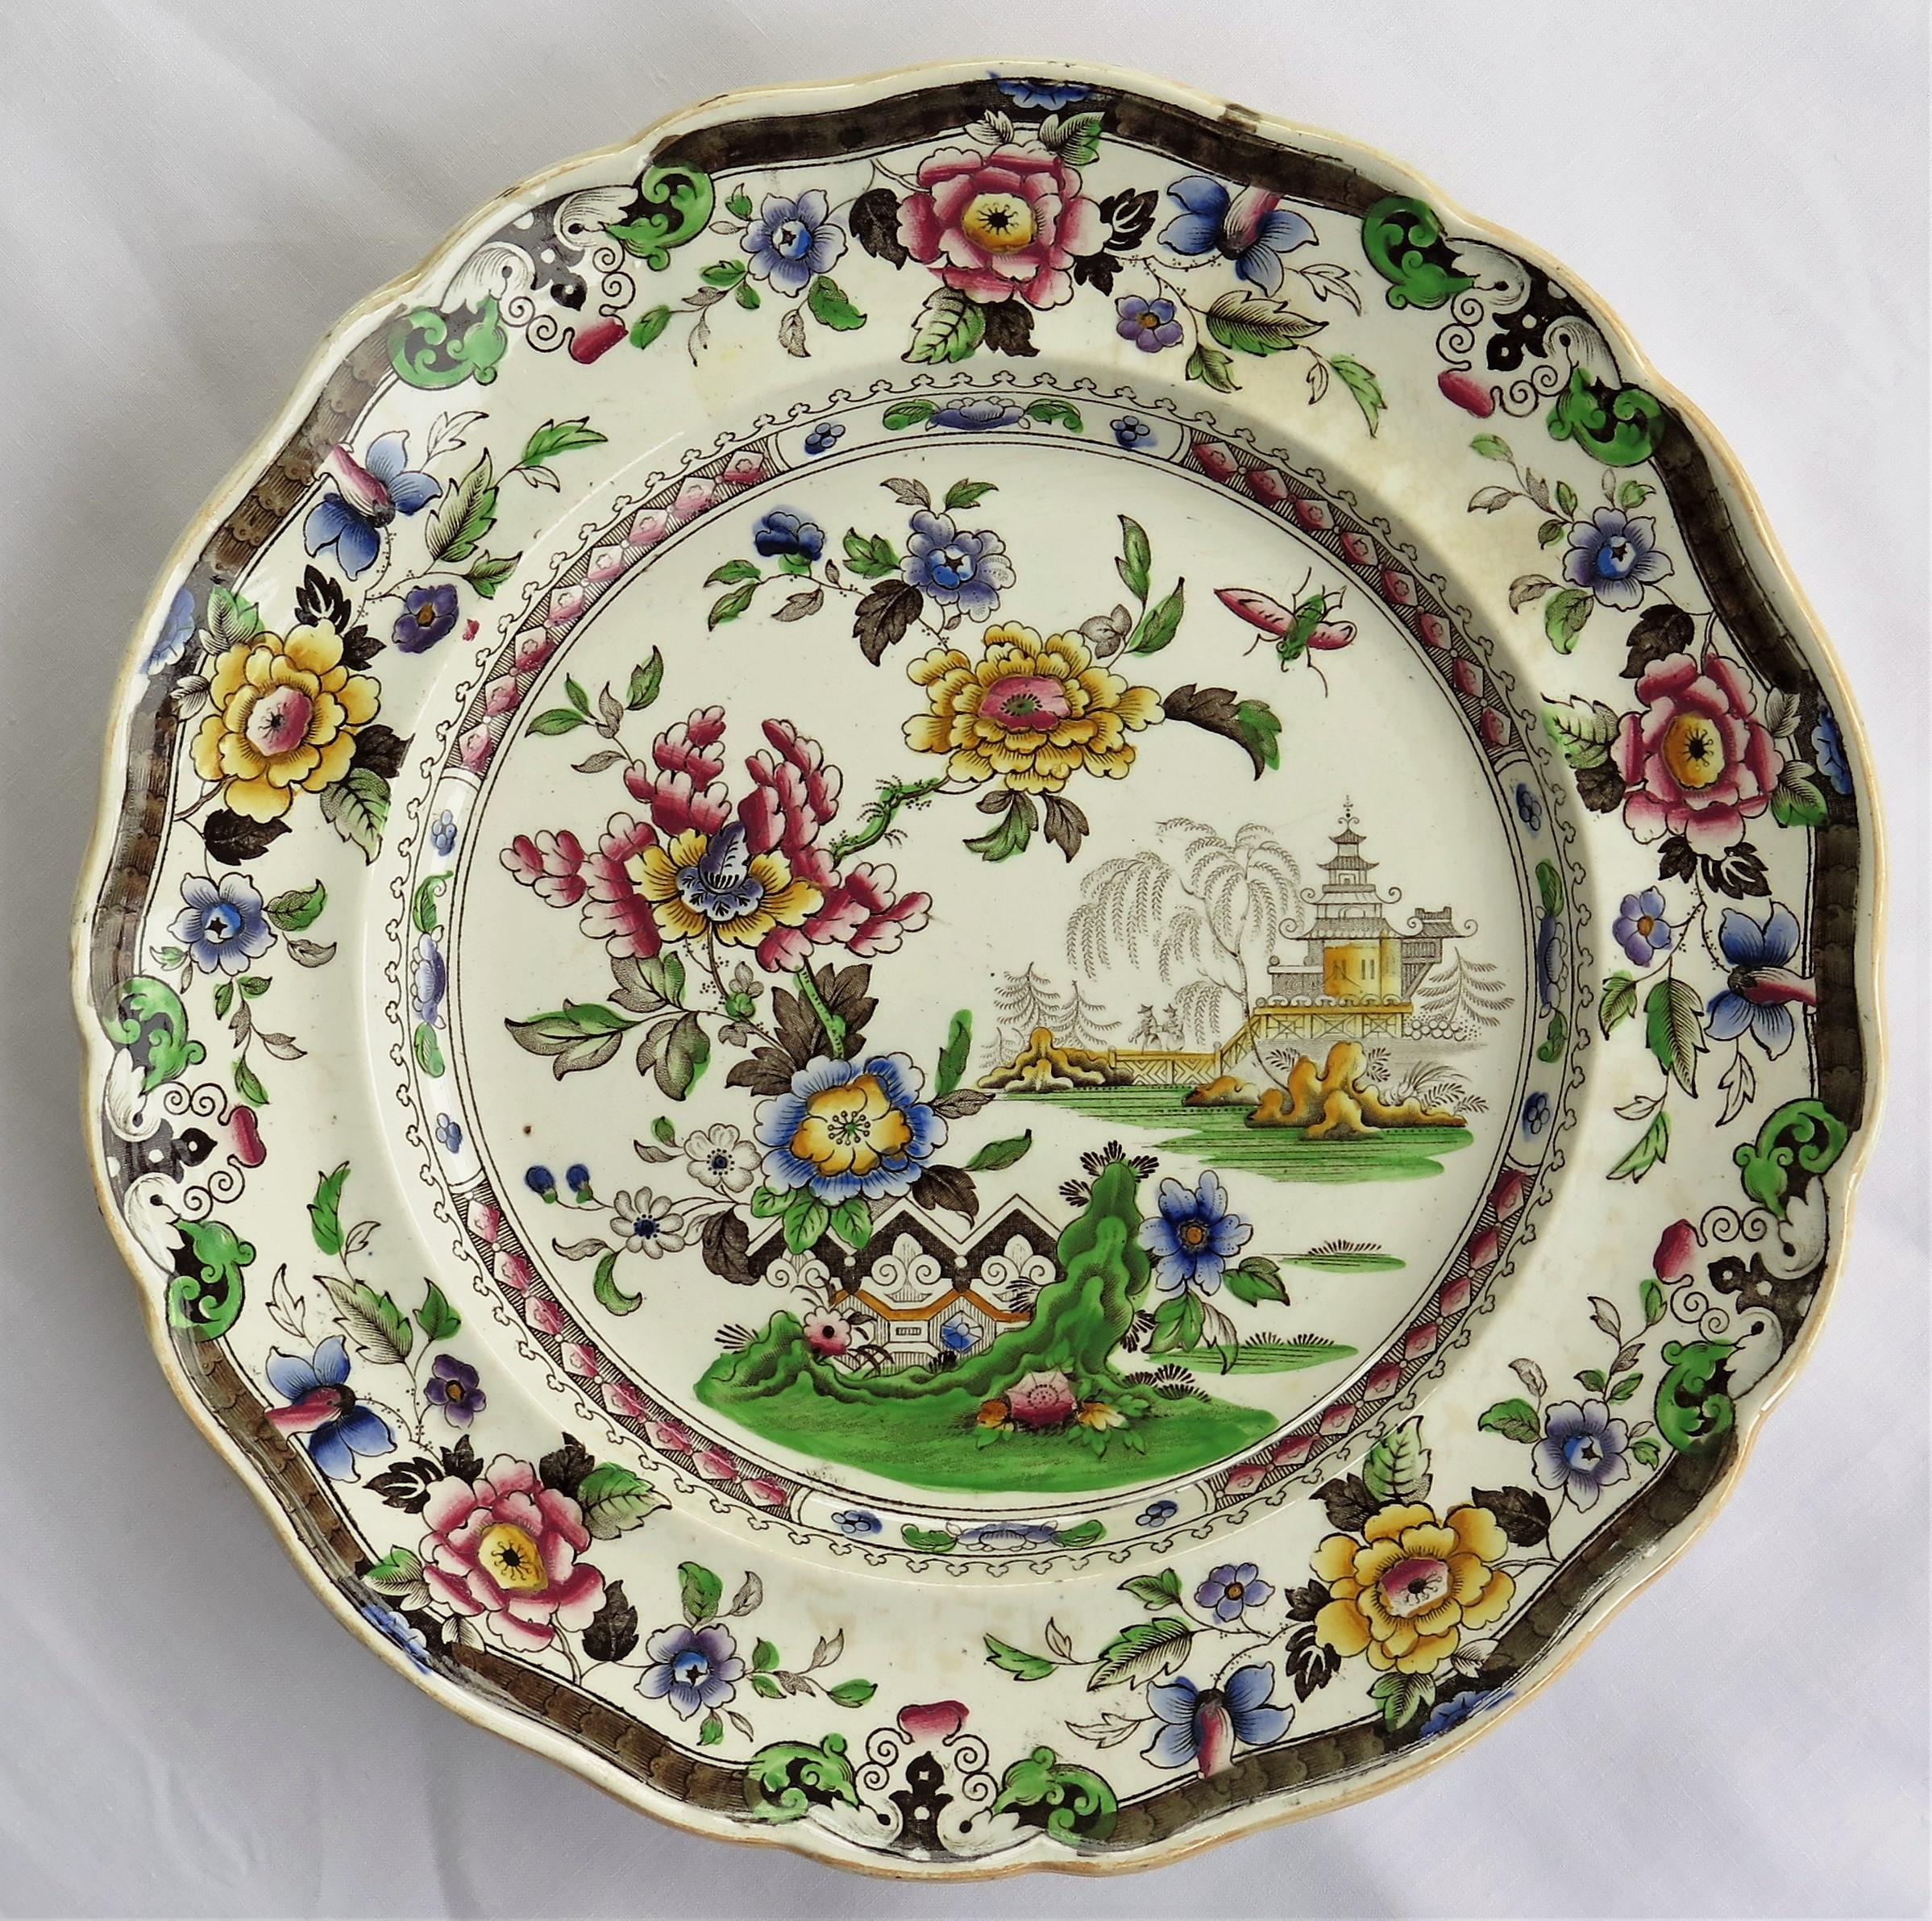 19th Century SIX Large Pottery Dinner Plates by Zachariah Boyle Chinese Flora Ptn, circa 1825